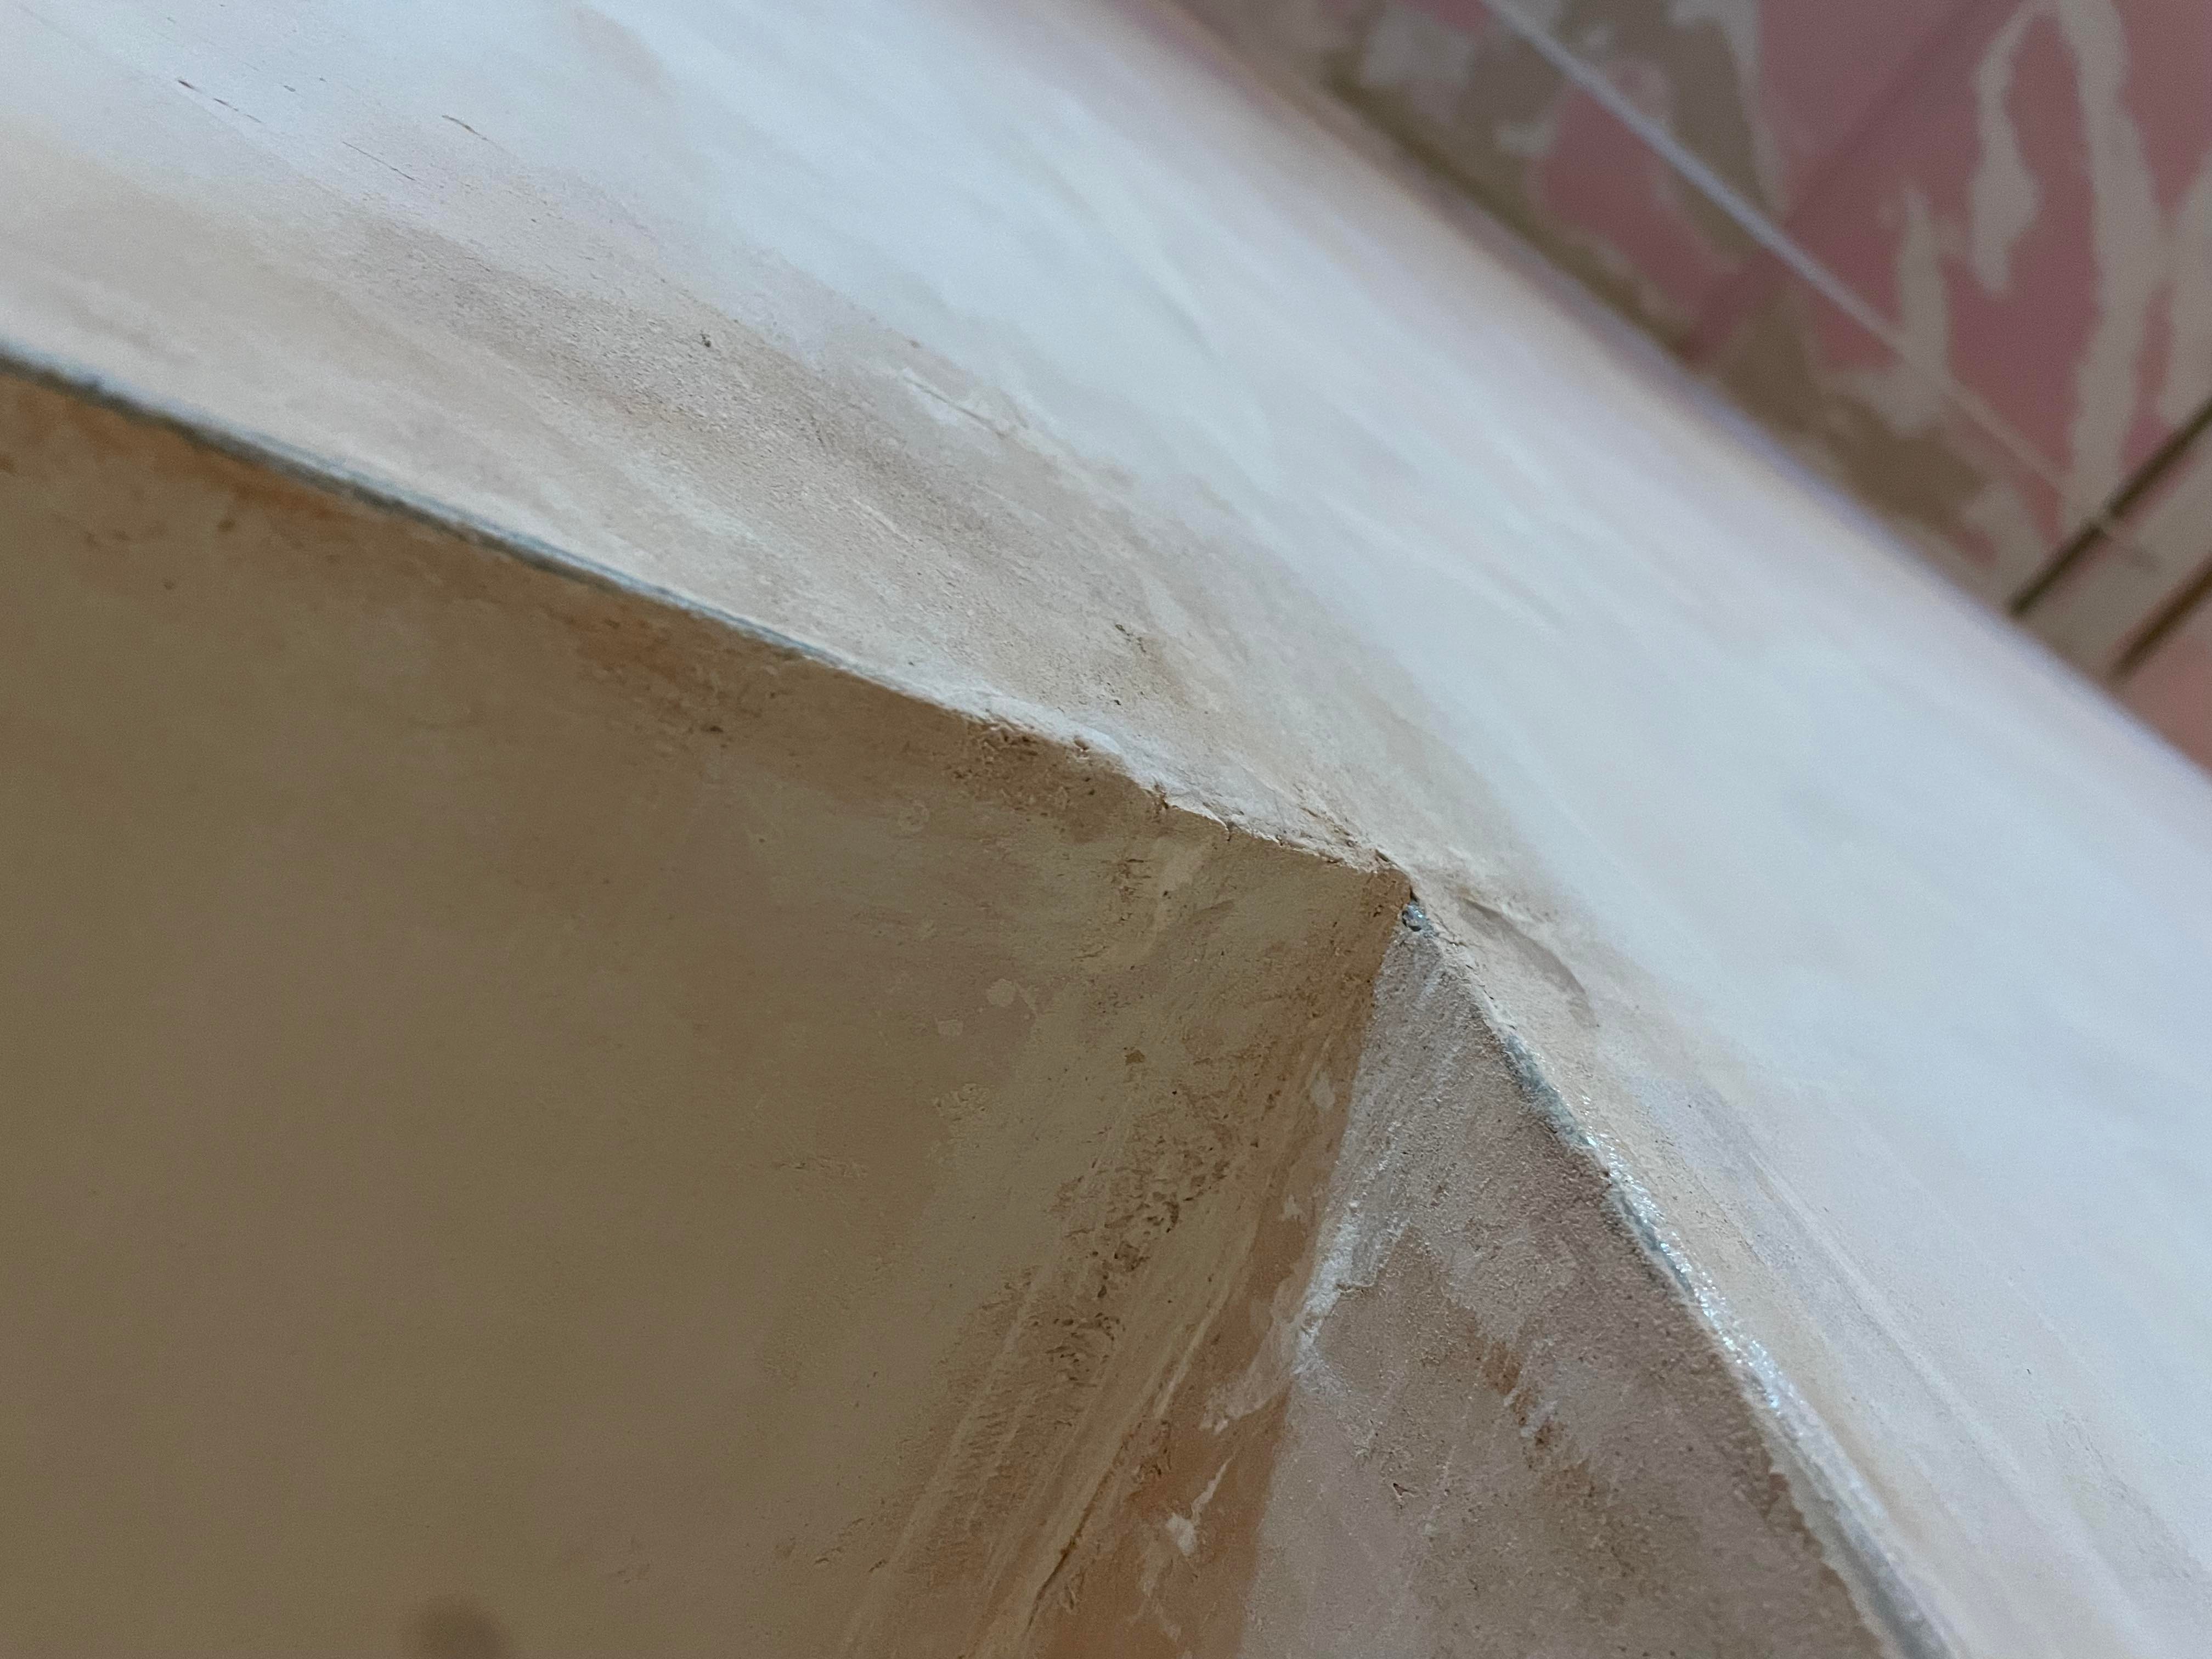 Is this good quality plastering? Am I being ripped off? Advice